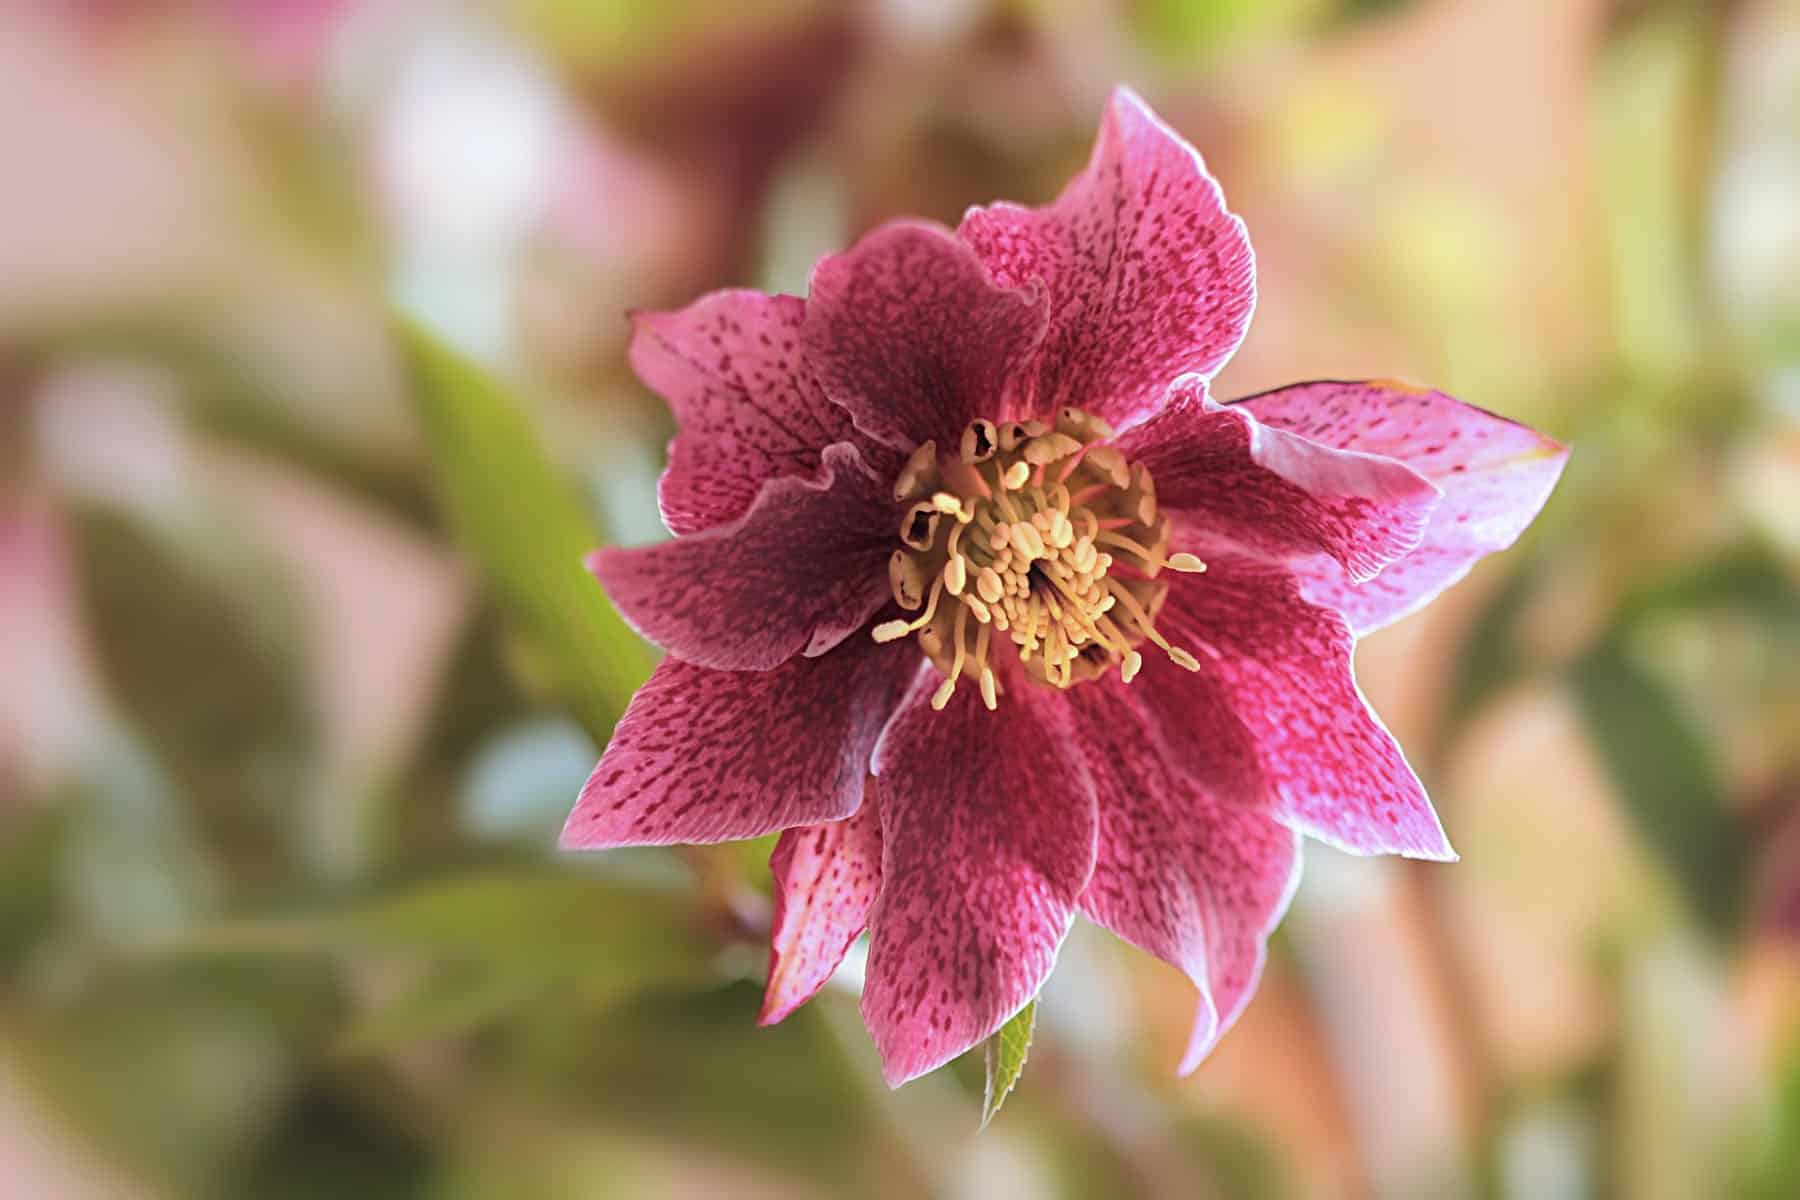 An overhead view of a speckled pink Helleborus flower, featuring dark pink petals with lighter pink flecks and a bright yellow center surrounded by numerous stamens.